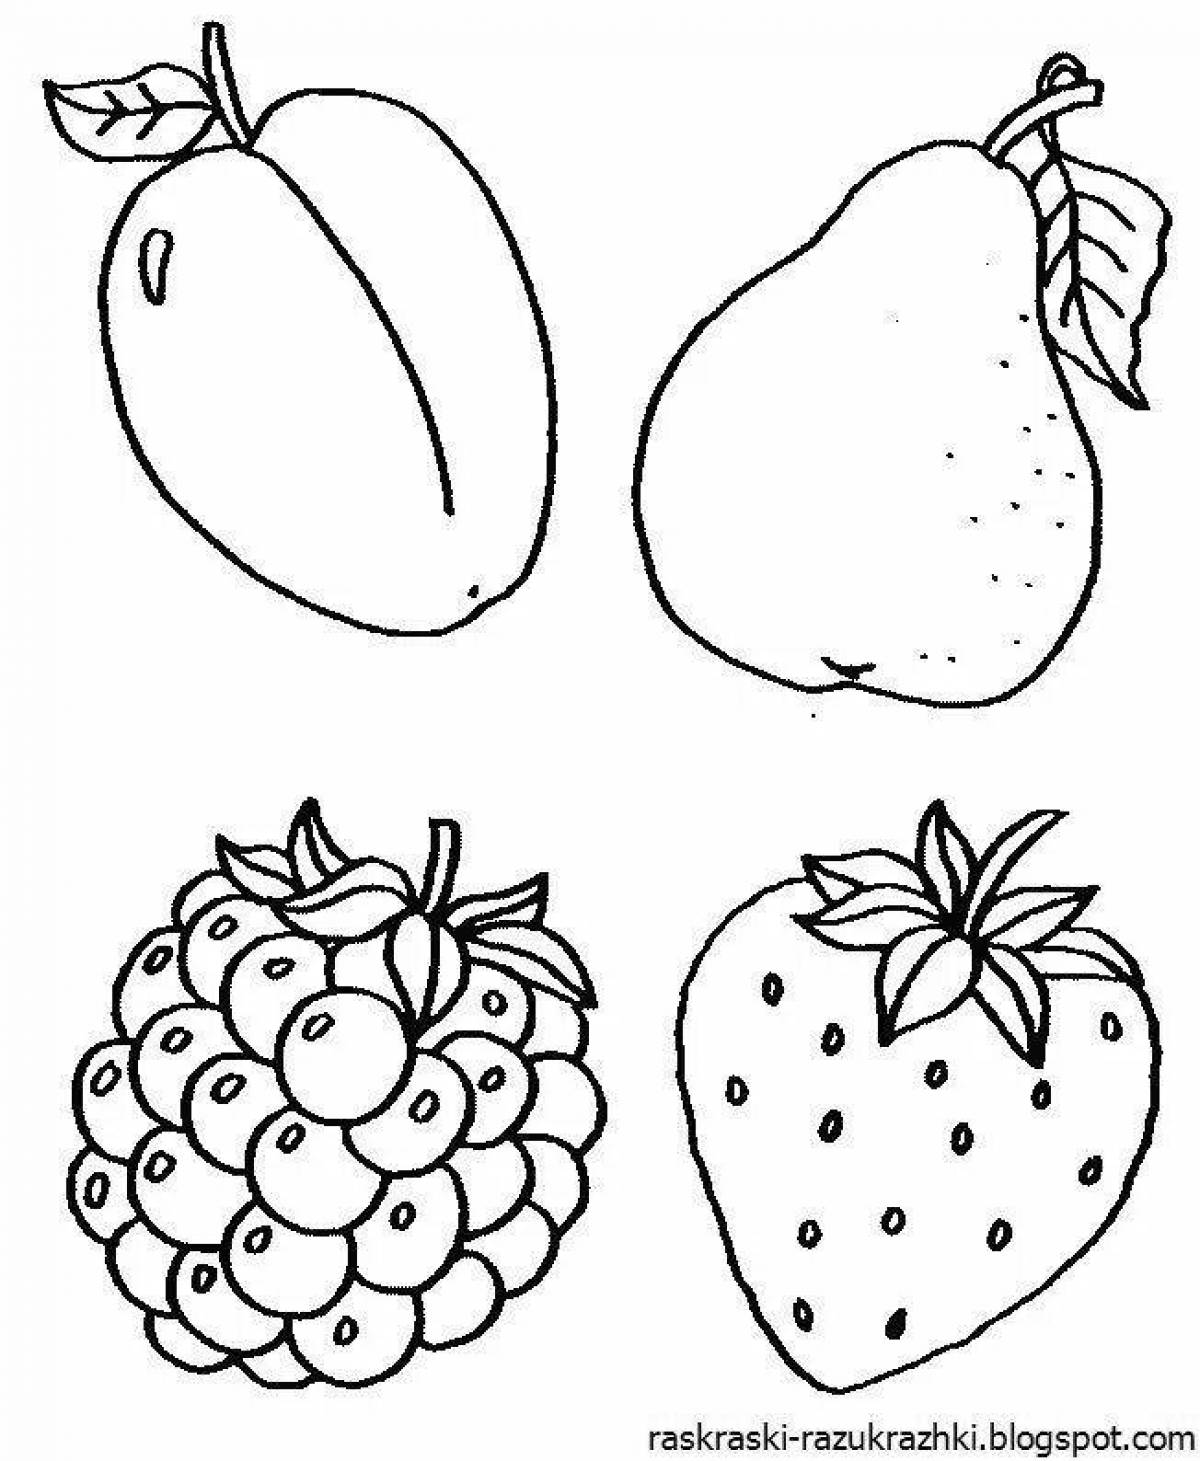 Colorful coloring pages with fruits for children 2-3 years old